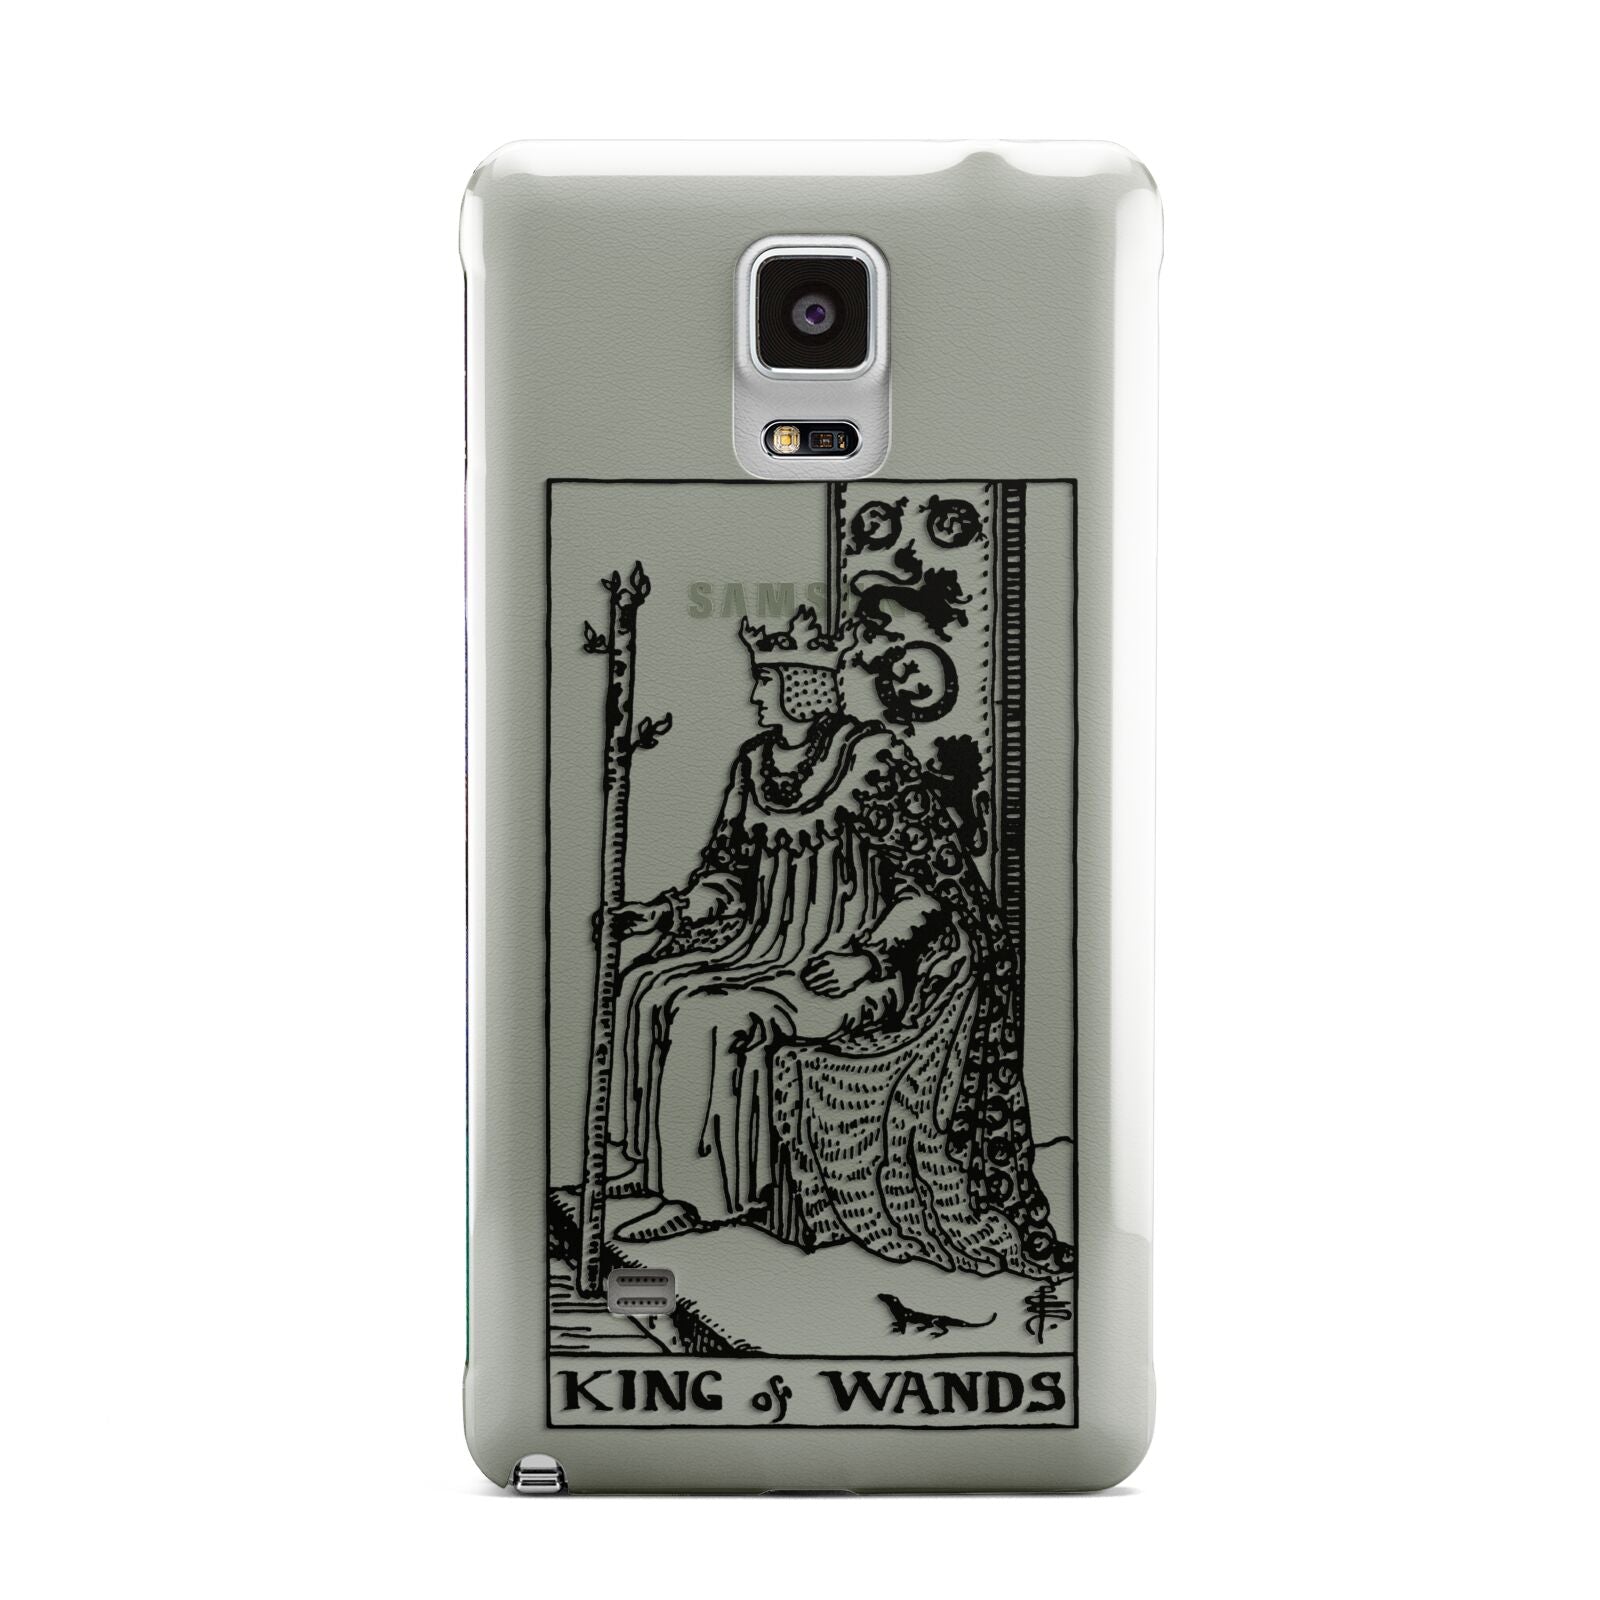 King of Wands Monochrome Samsung Galaxy Note 4 Case